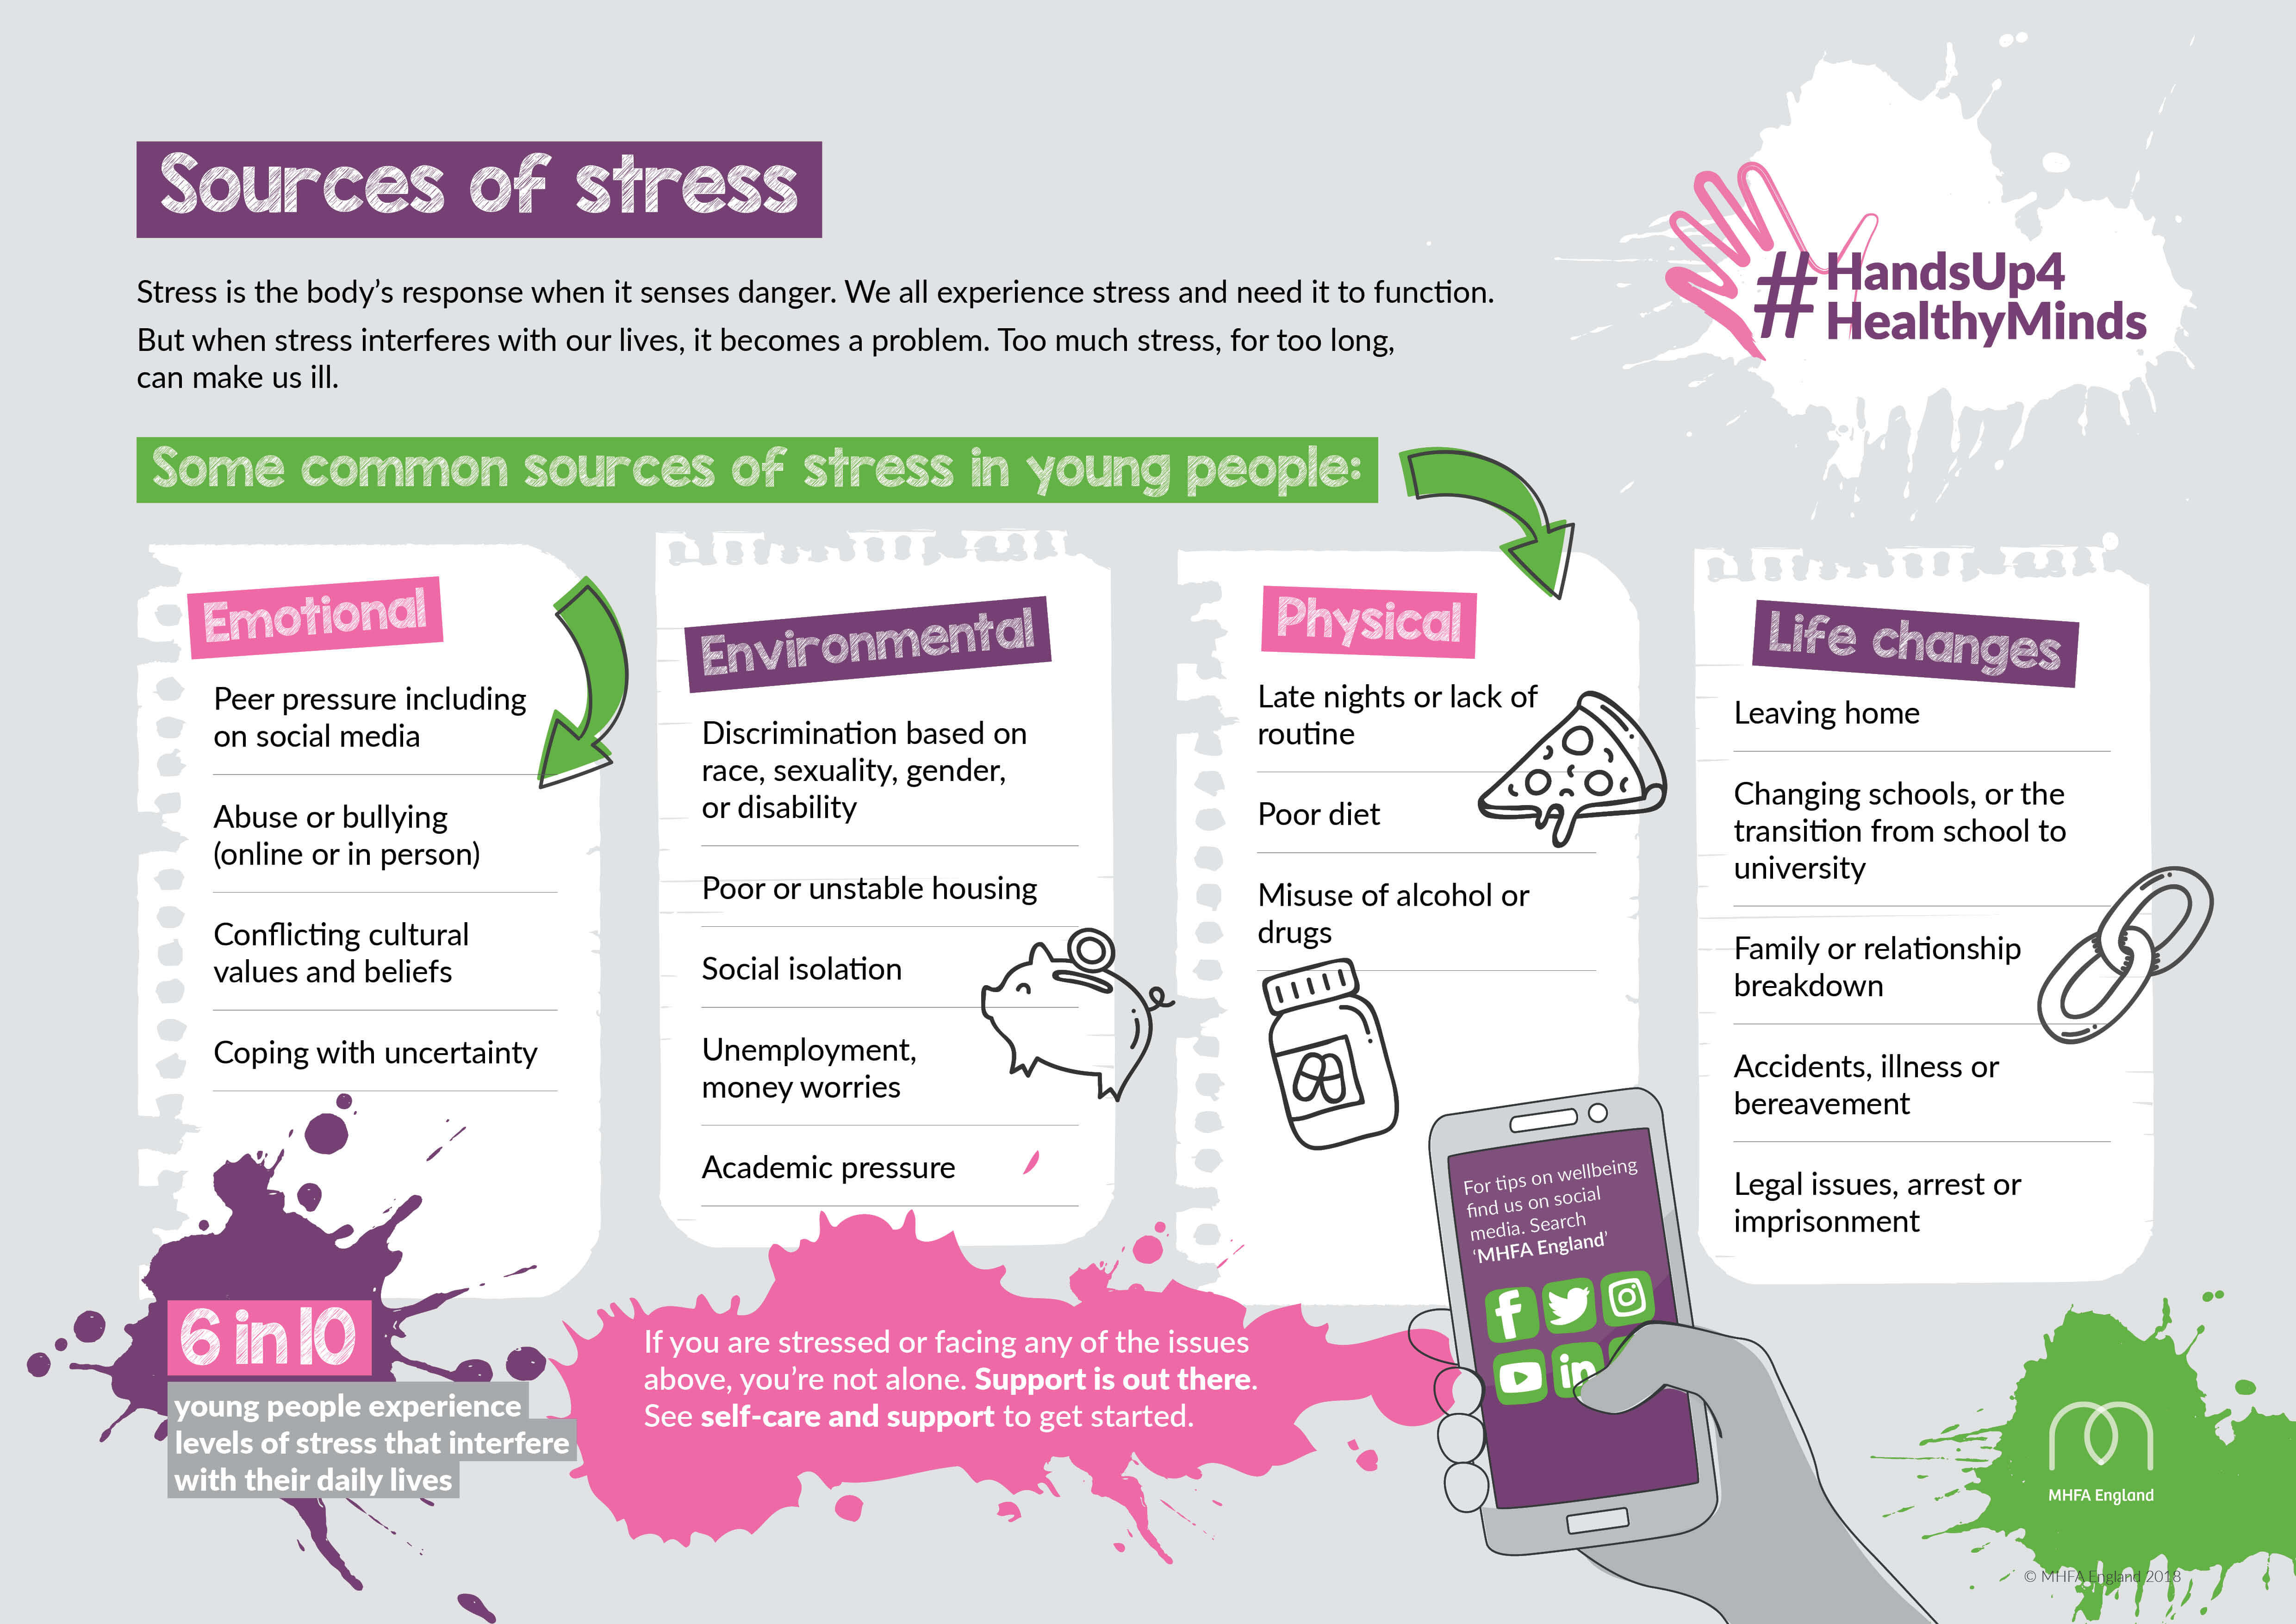 #HU4HM - Sources of stress for young people